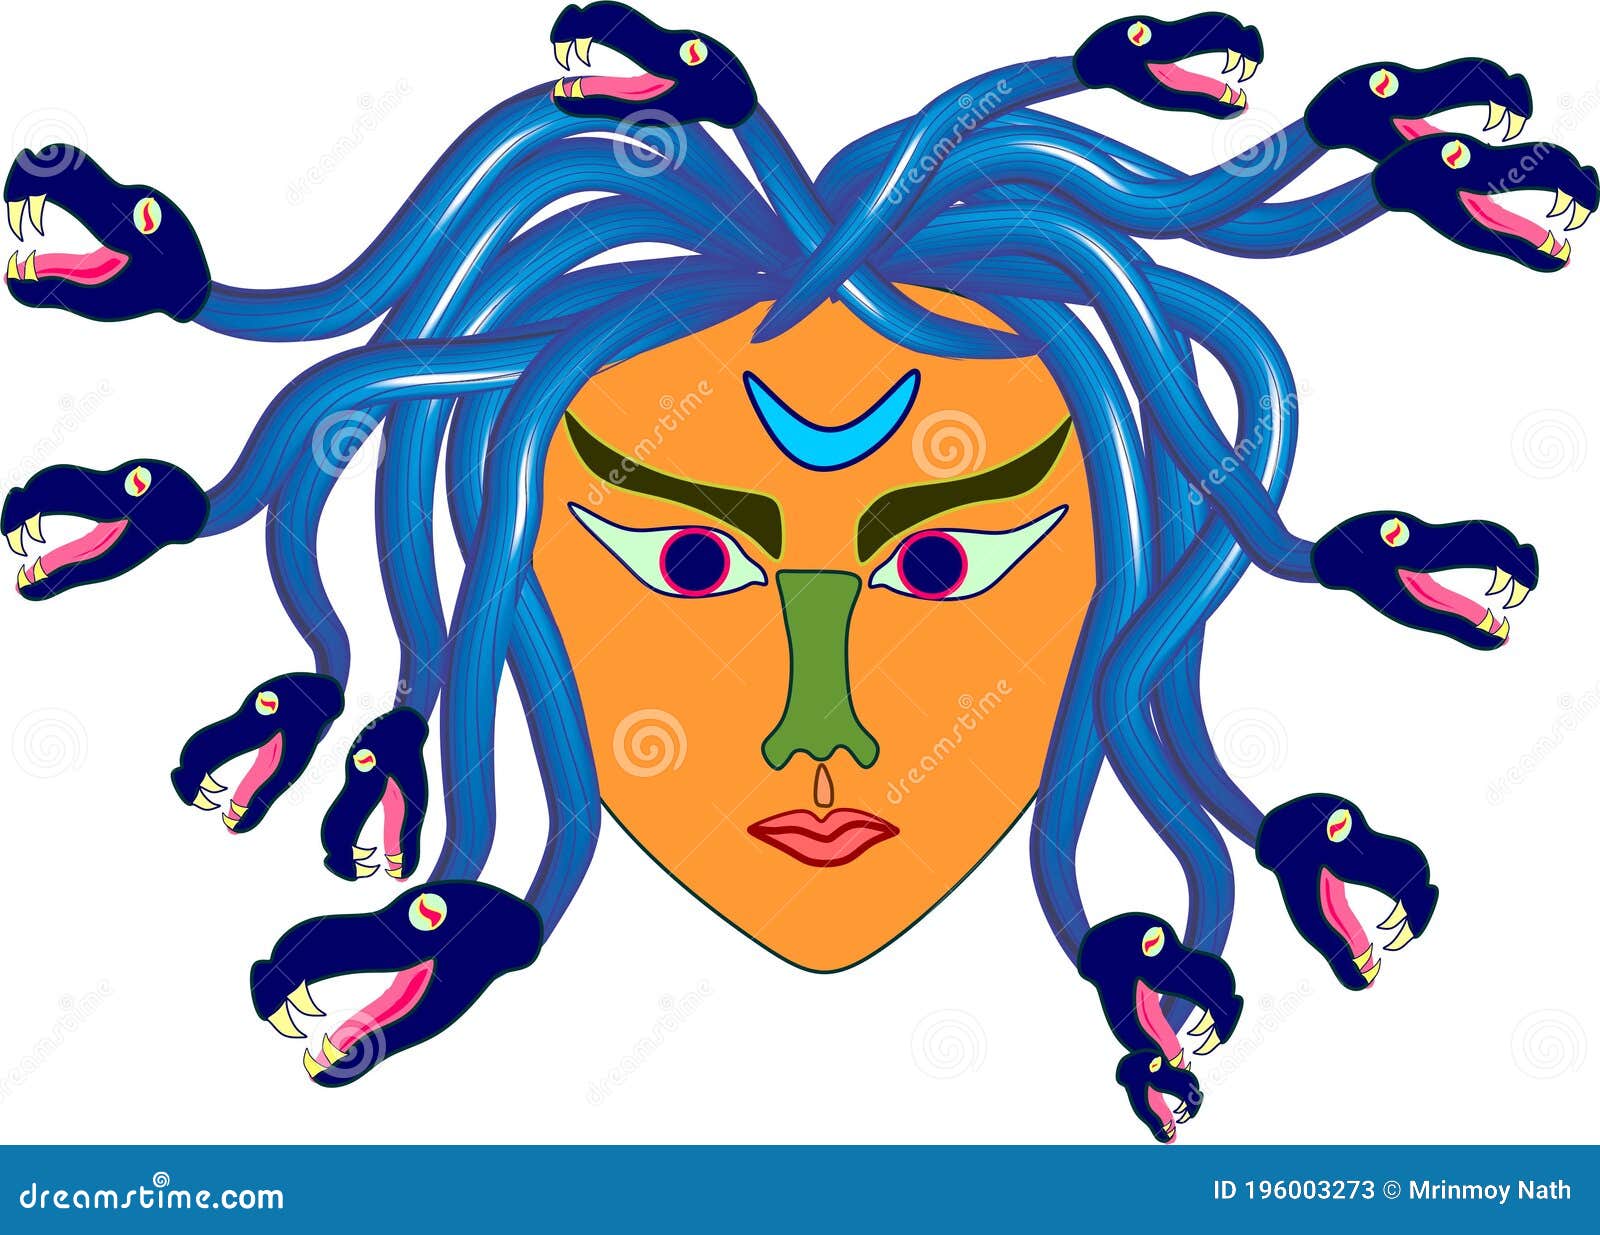 That is the Nice Art Work of Medusa Face Which is Looking so